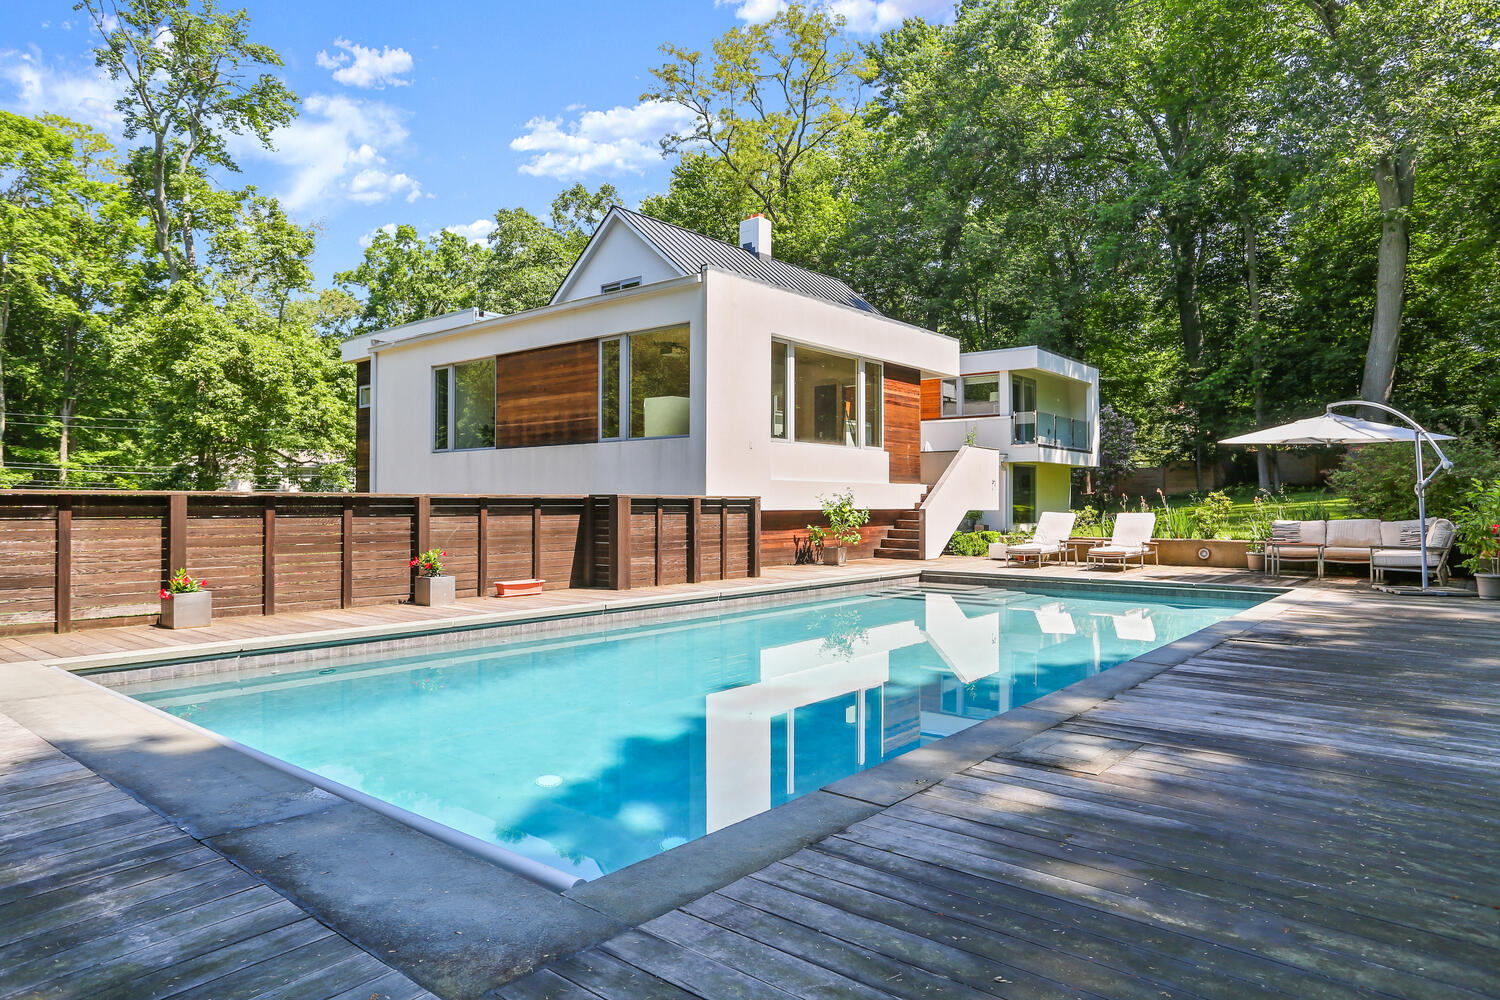 Westport home inspired by mid-century design listed for .75M